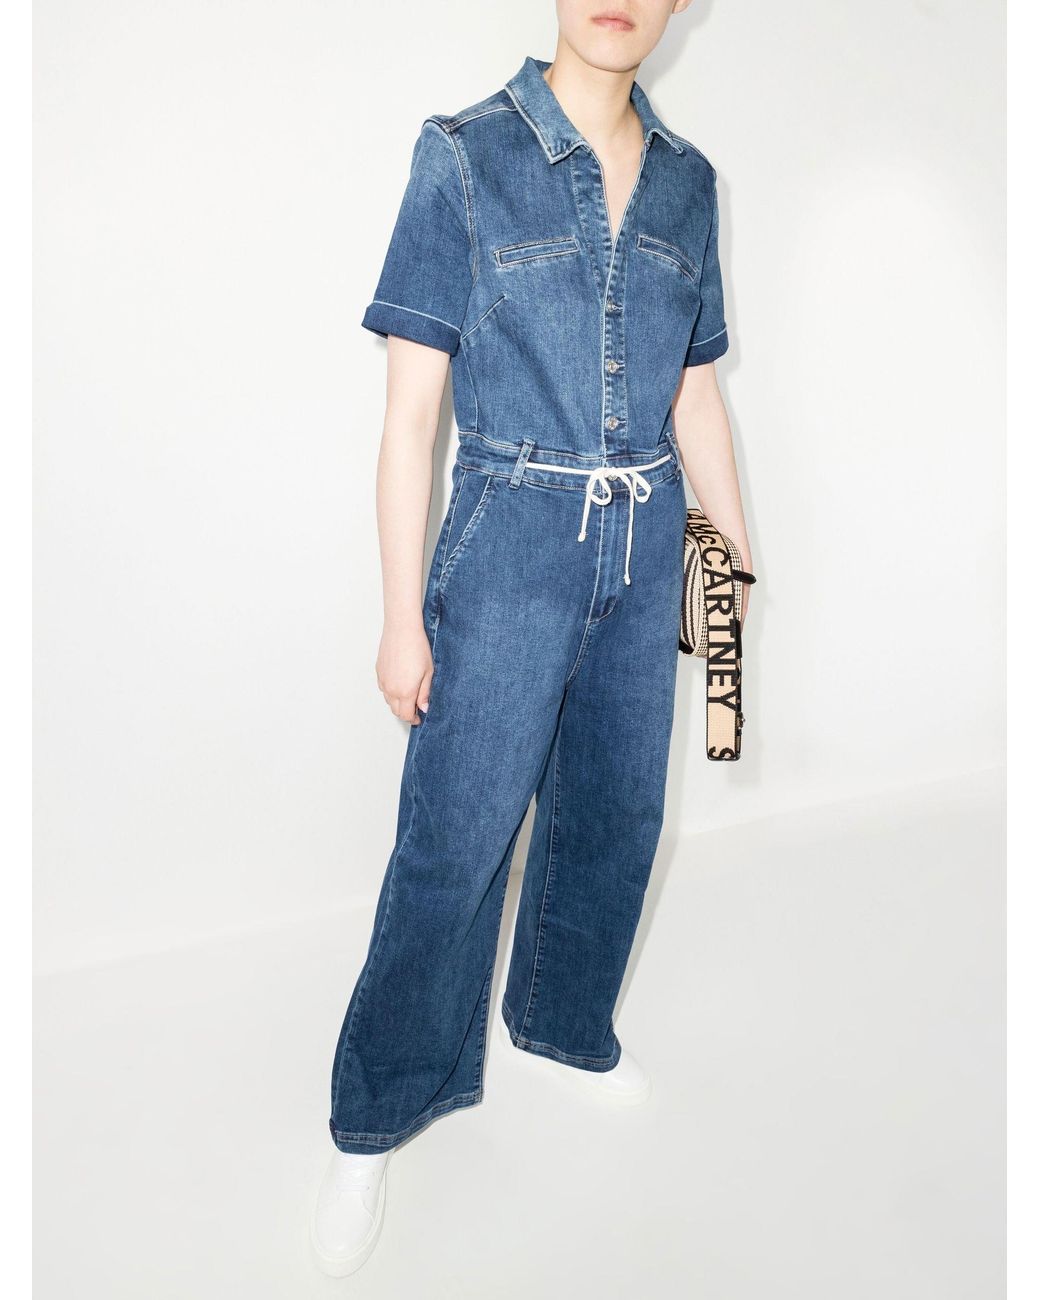 Womens Clothing Jumpsuits and rompers Full-length jumpsuits and rompers PAIGE Carly Tied-waist Denim Jumpsuit in Blue 